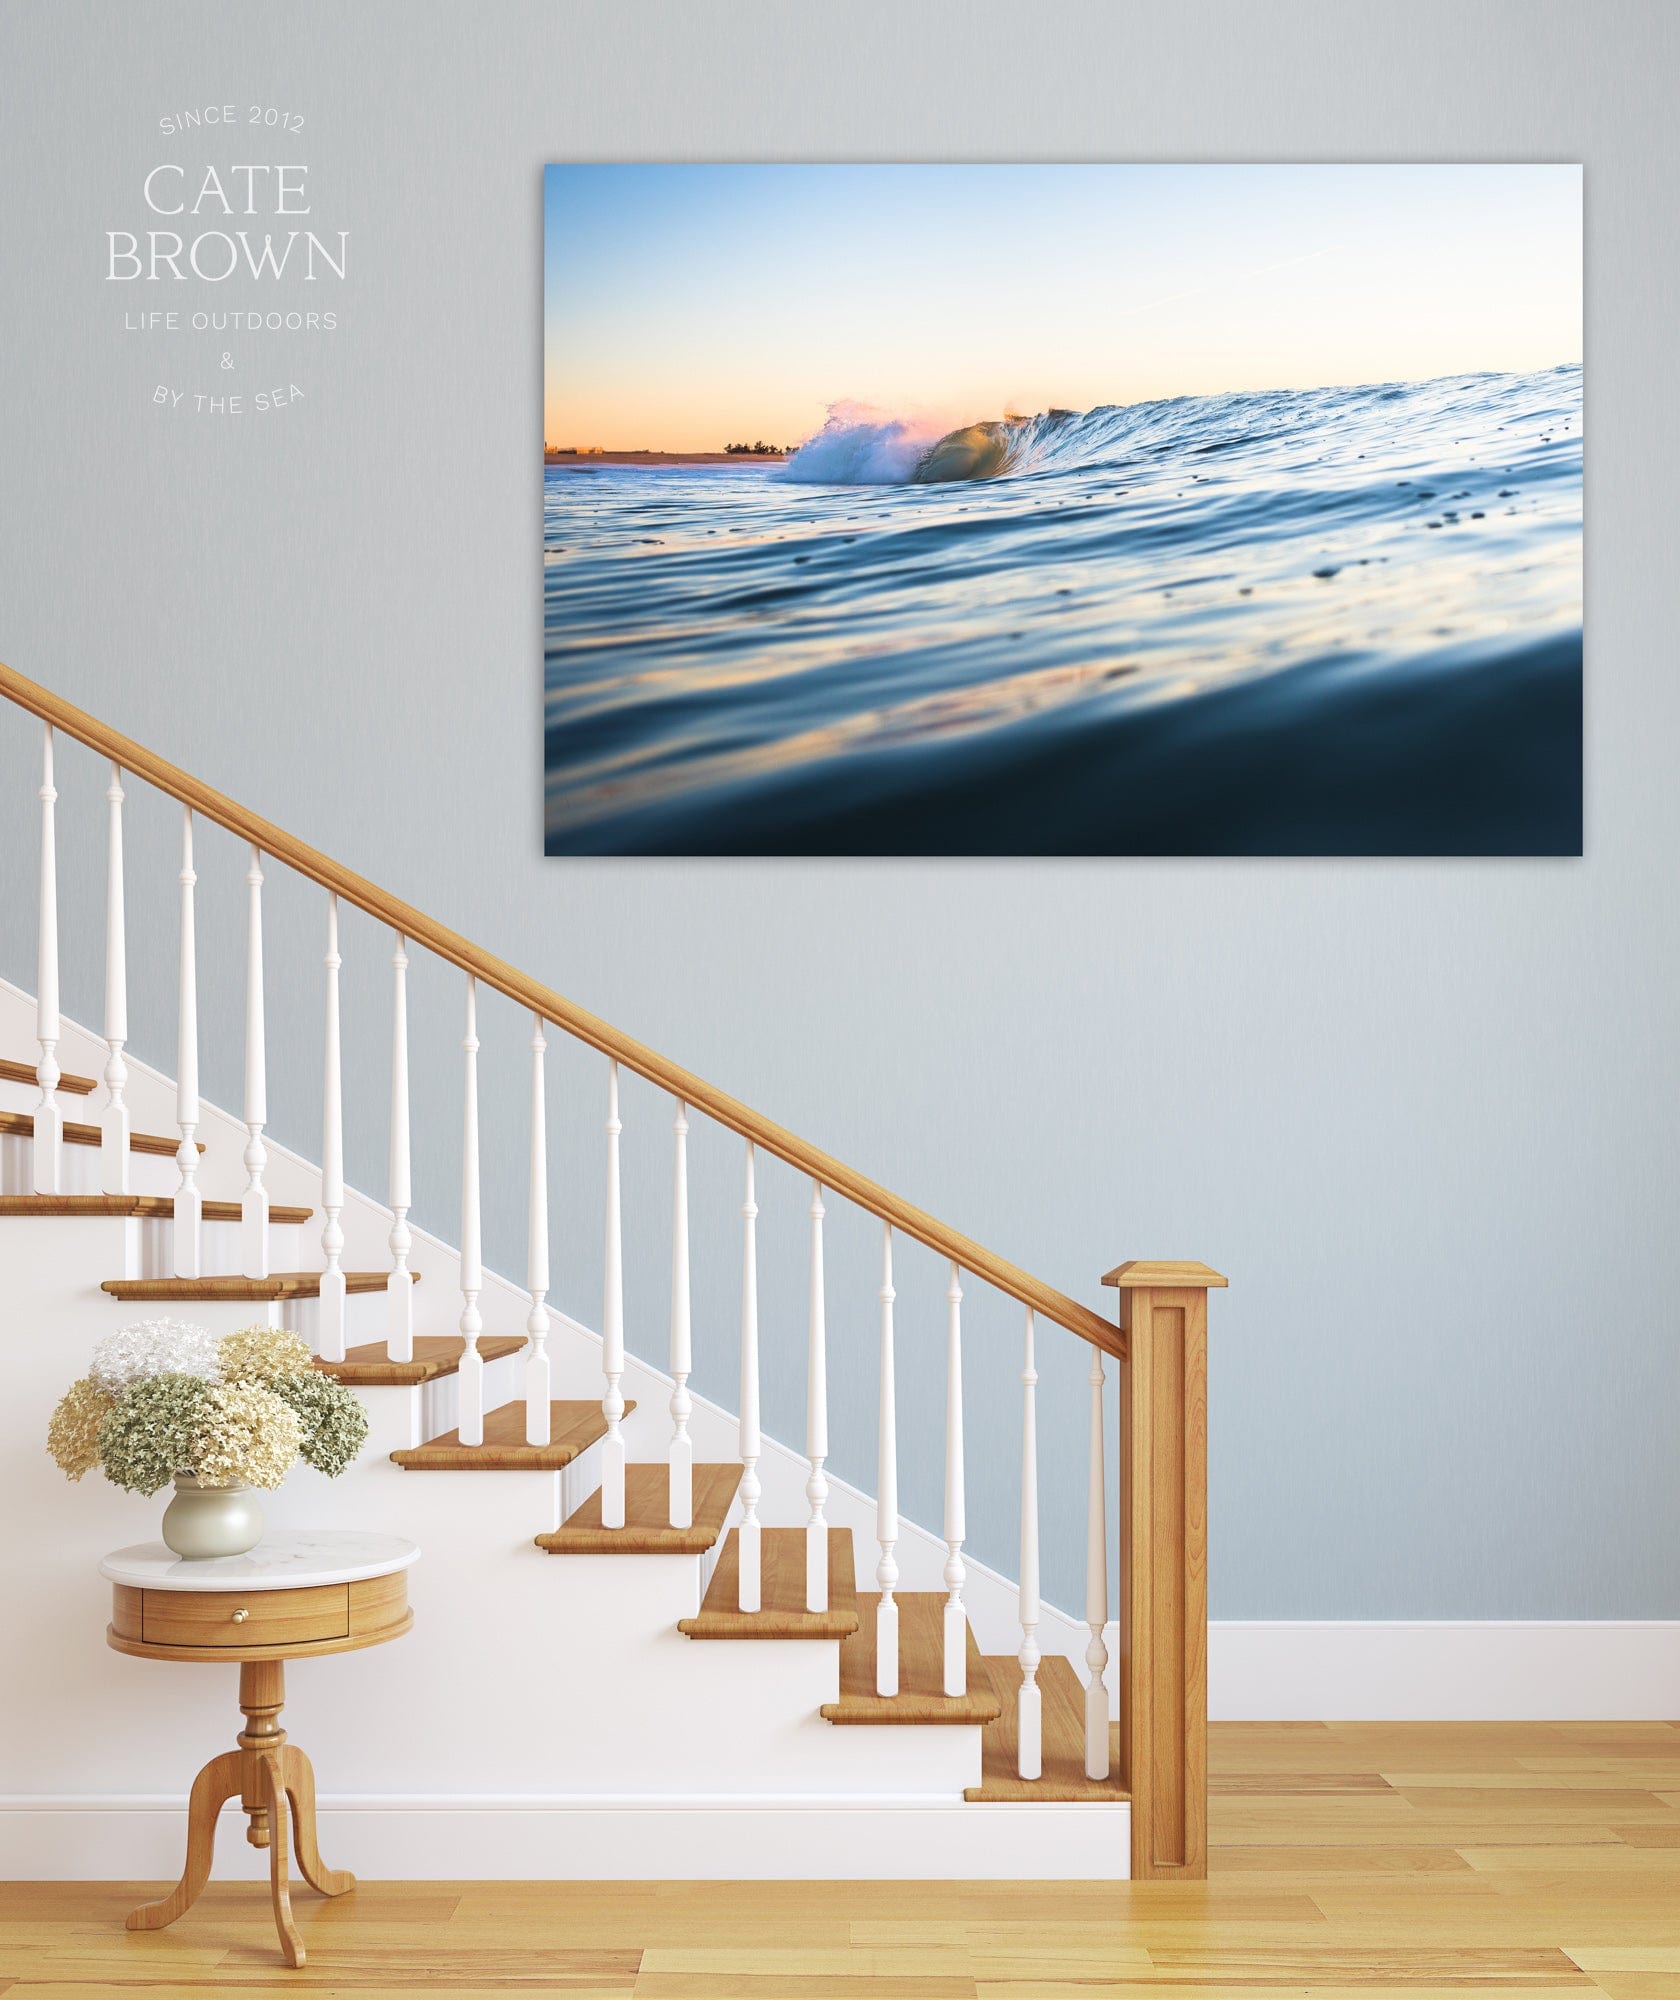 Cate Brown Photo Canvas / 16"x24" / None (Print Only) Shorebreak at First Light  //  Ocean Photography Made to Order Ocean Fine Art